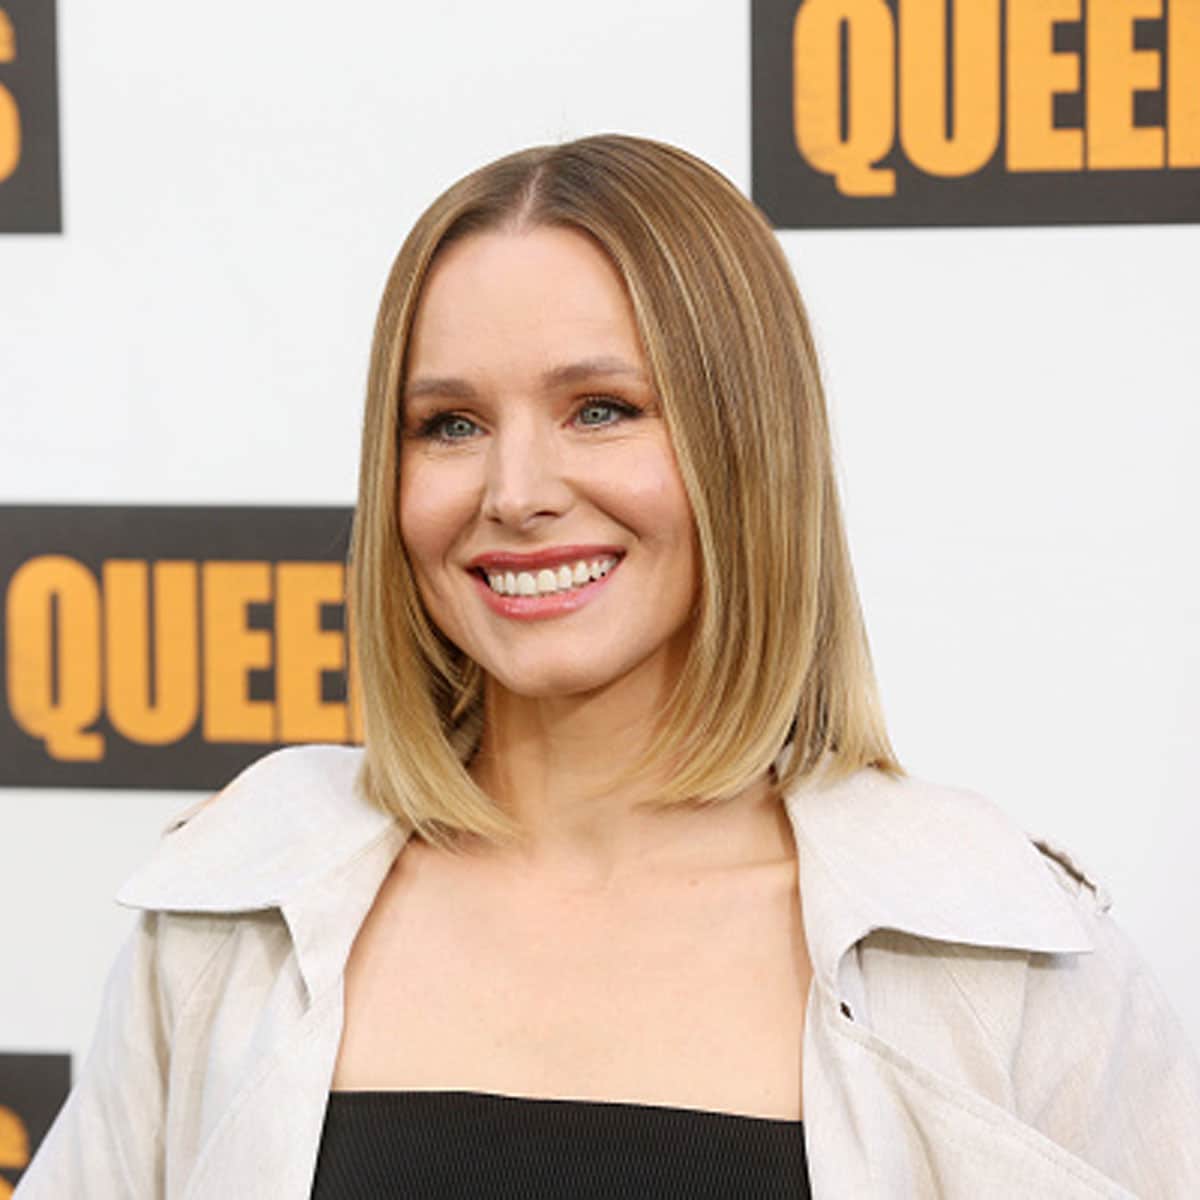 Kristen Bell attends the Photocall For STX's "Queenpins" at Four Seasons Hotel